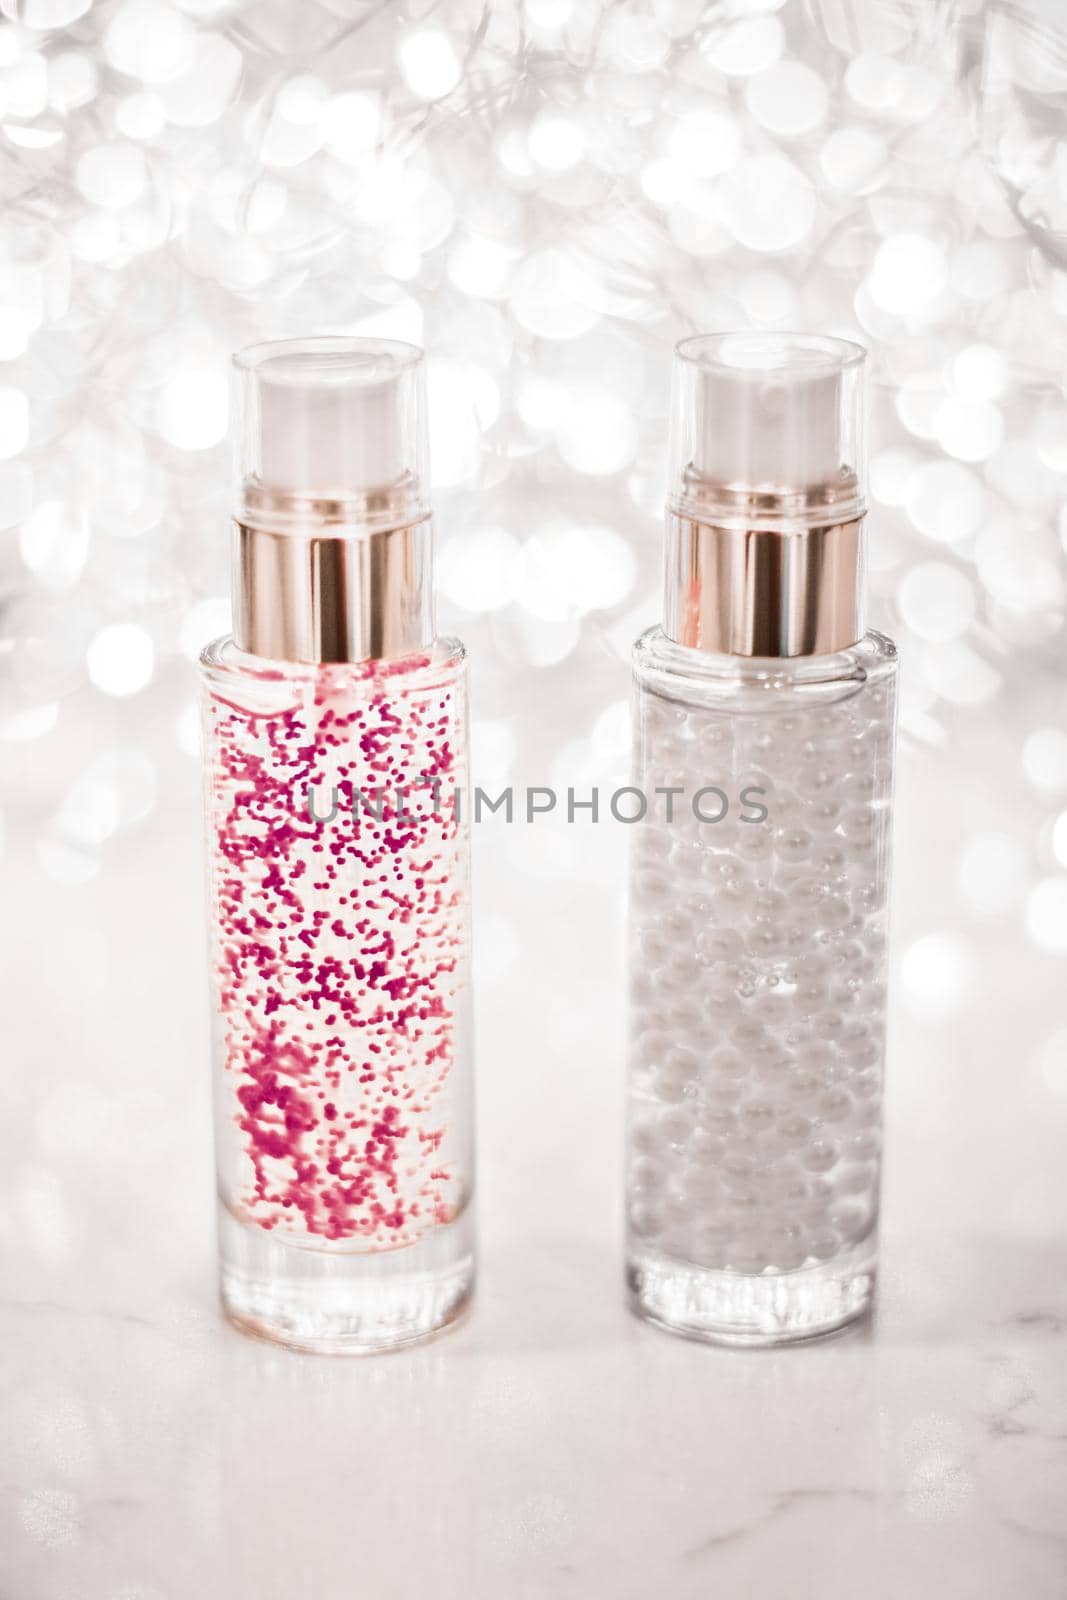 Holiday make-up base gel, serum emulsion, lotion bottle and silver glitter, luxury skin and body care cosmetics for beauty brand ads by Anneleven